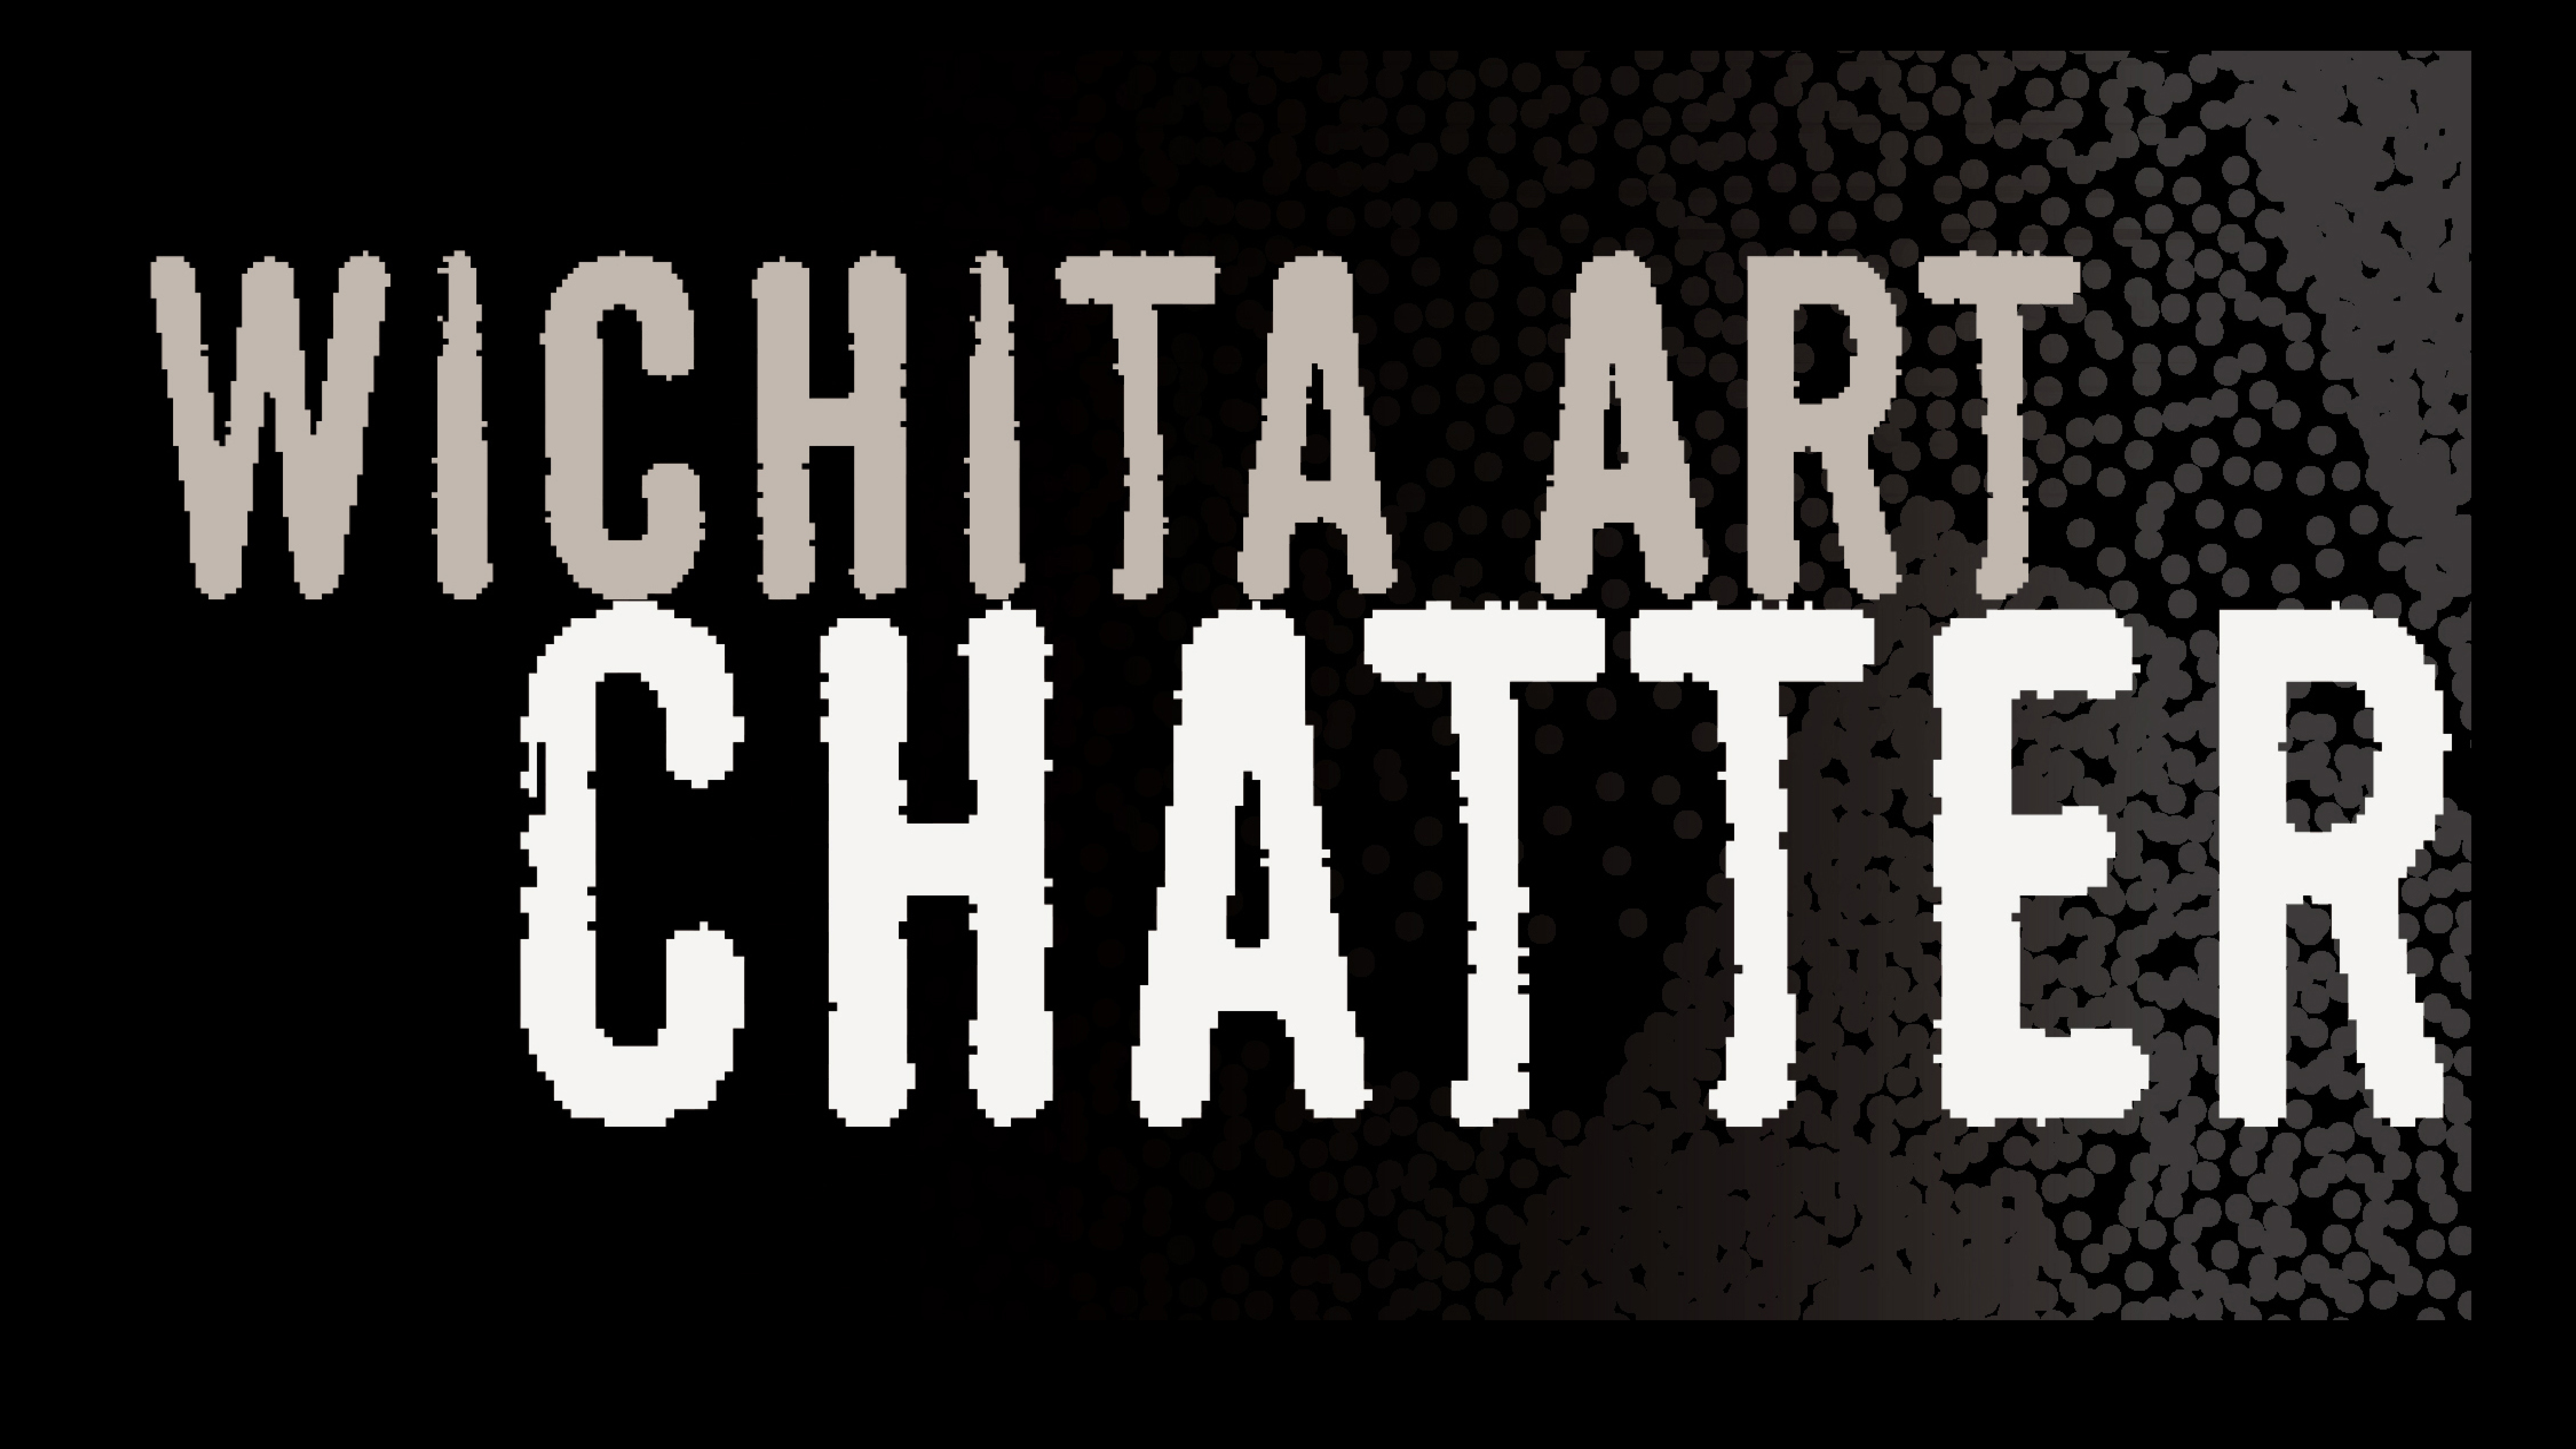 Graphic of text Wichita Art Chatter on a black background